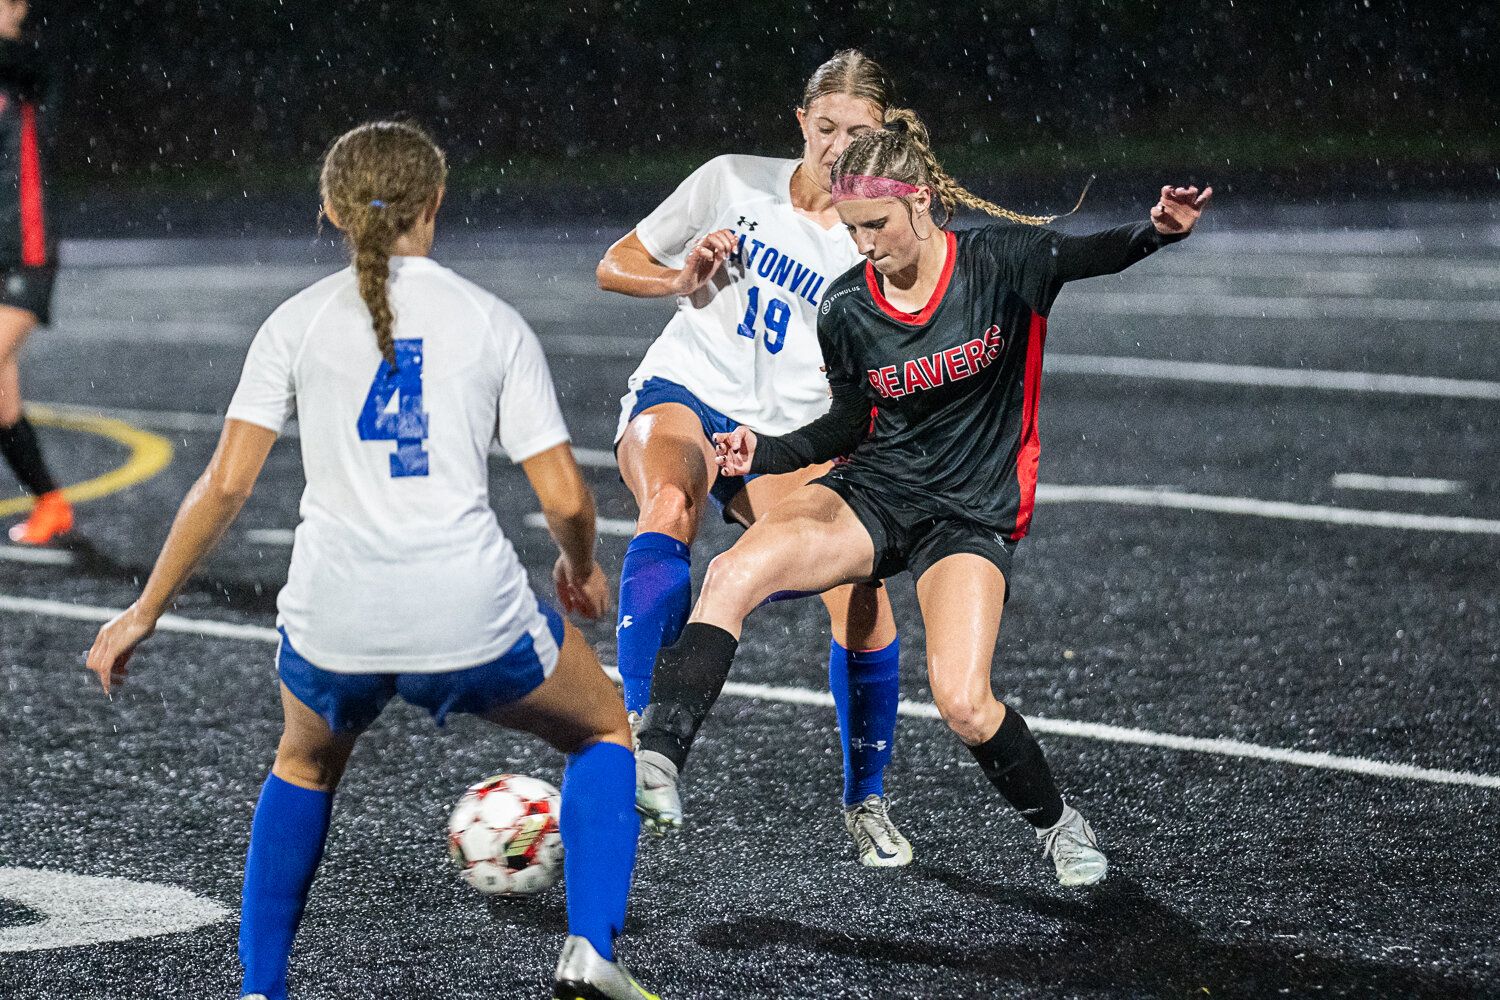 Kendra Cutlip gets stuck in to a tackle during the first half of Tenino's 1-0 loss to Eatonville on Oct. 10.